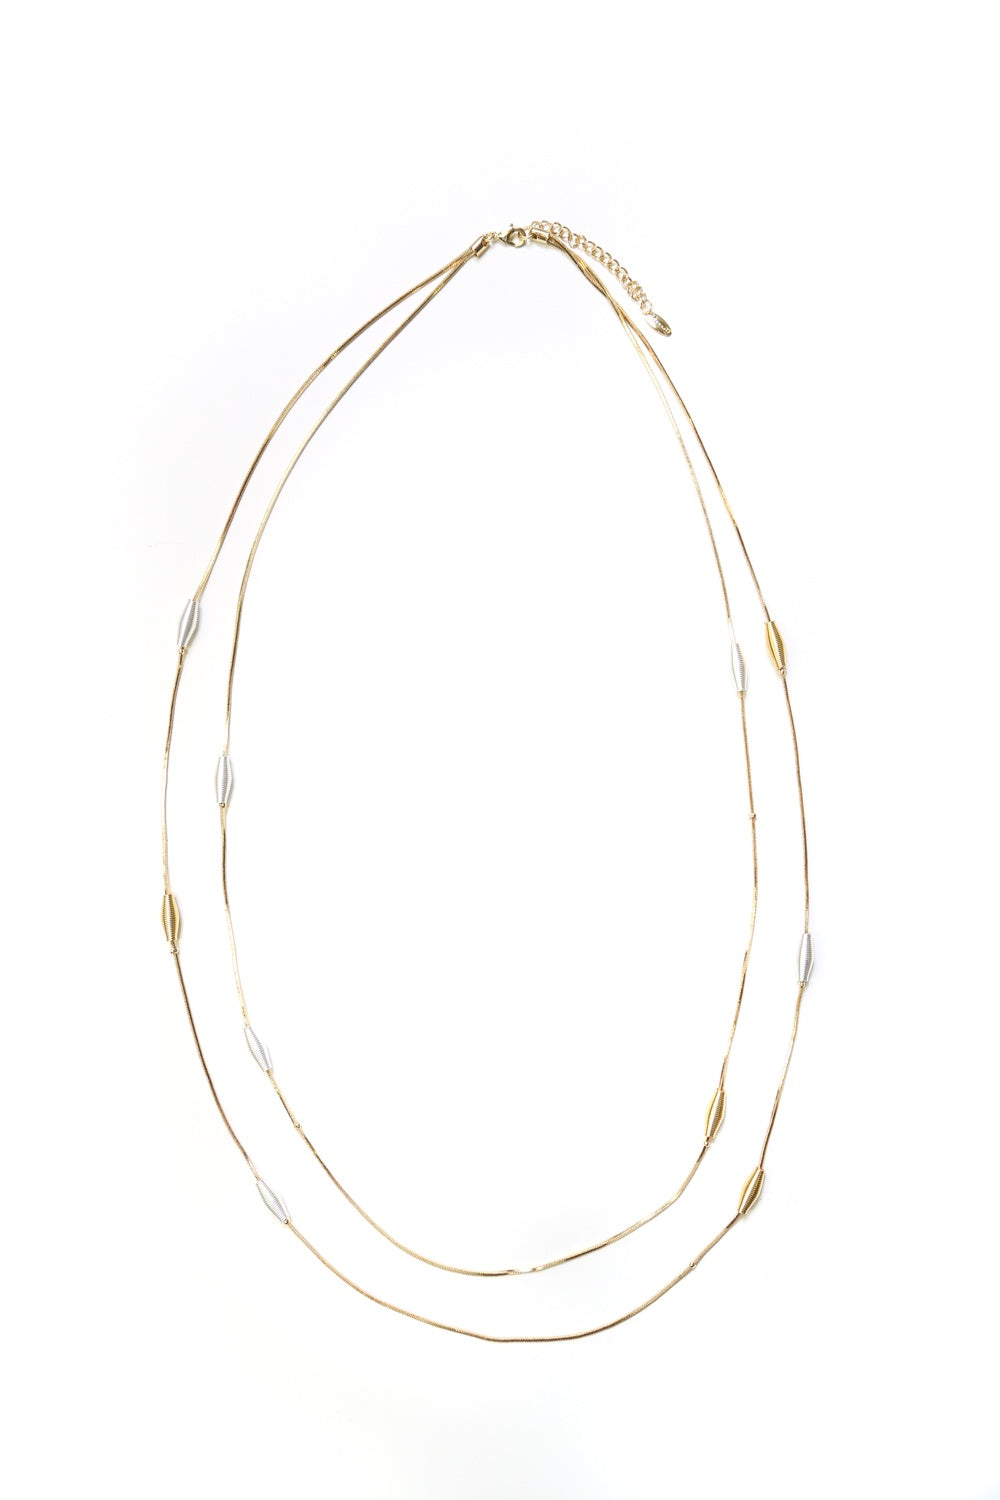 Livia Necklace Gold and Silver Necklace